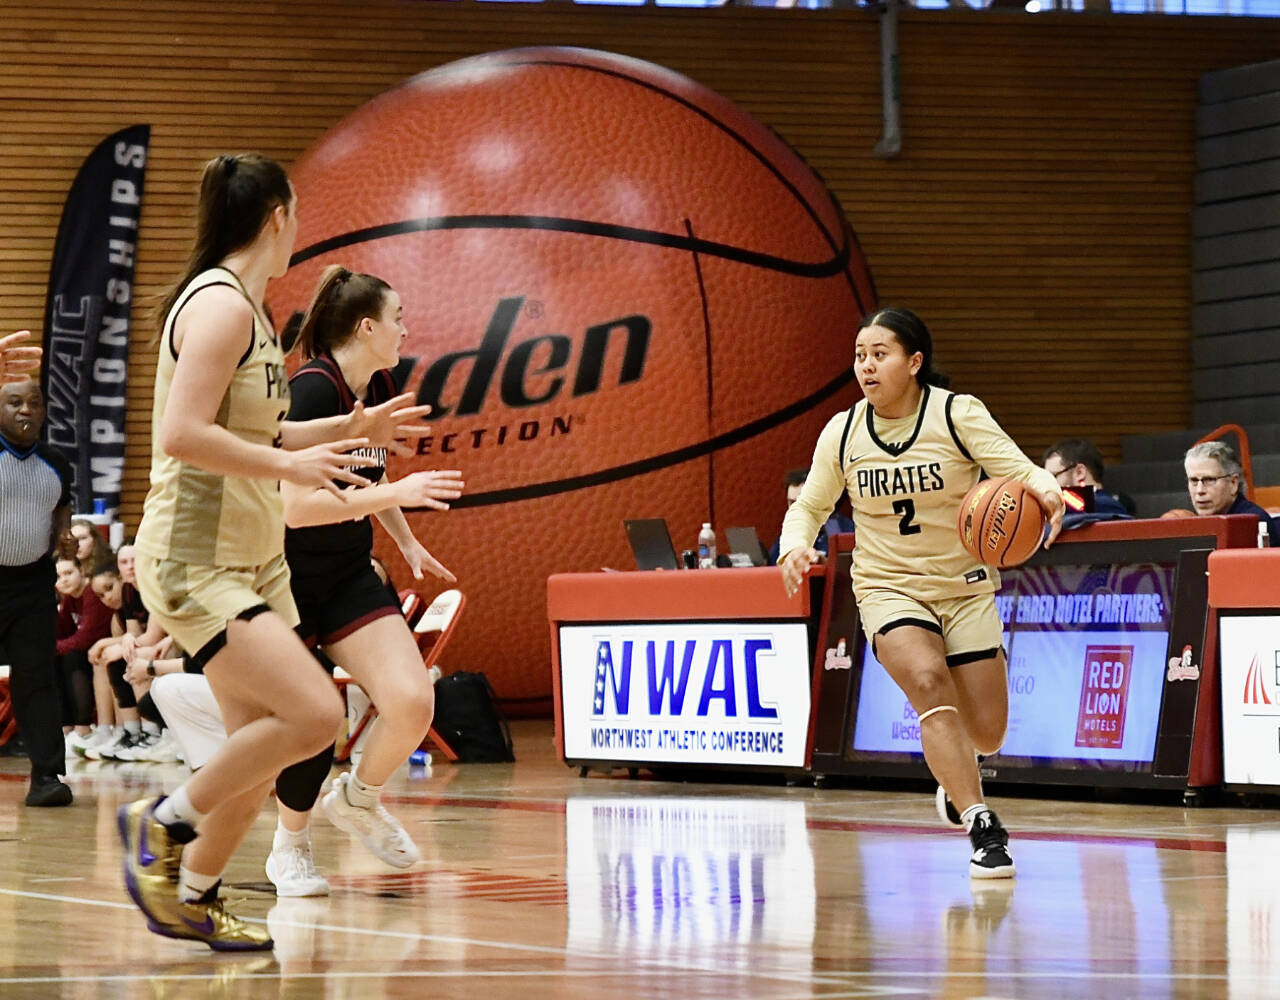 Peninsula College’s Tatianna Kamae (2) brings the ball up the court against North Idaho in the Pirates’ 56-48 win in the opening round of the NWAC Tournament held in Everett. (Jay Cline/Peninsula College Athletics)